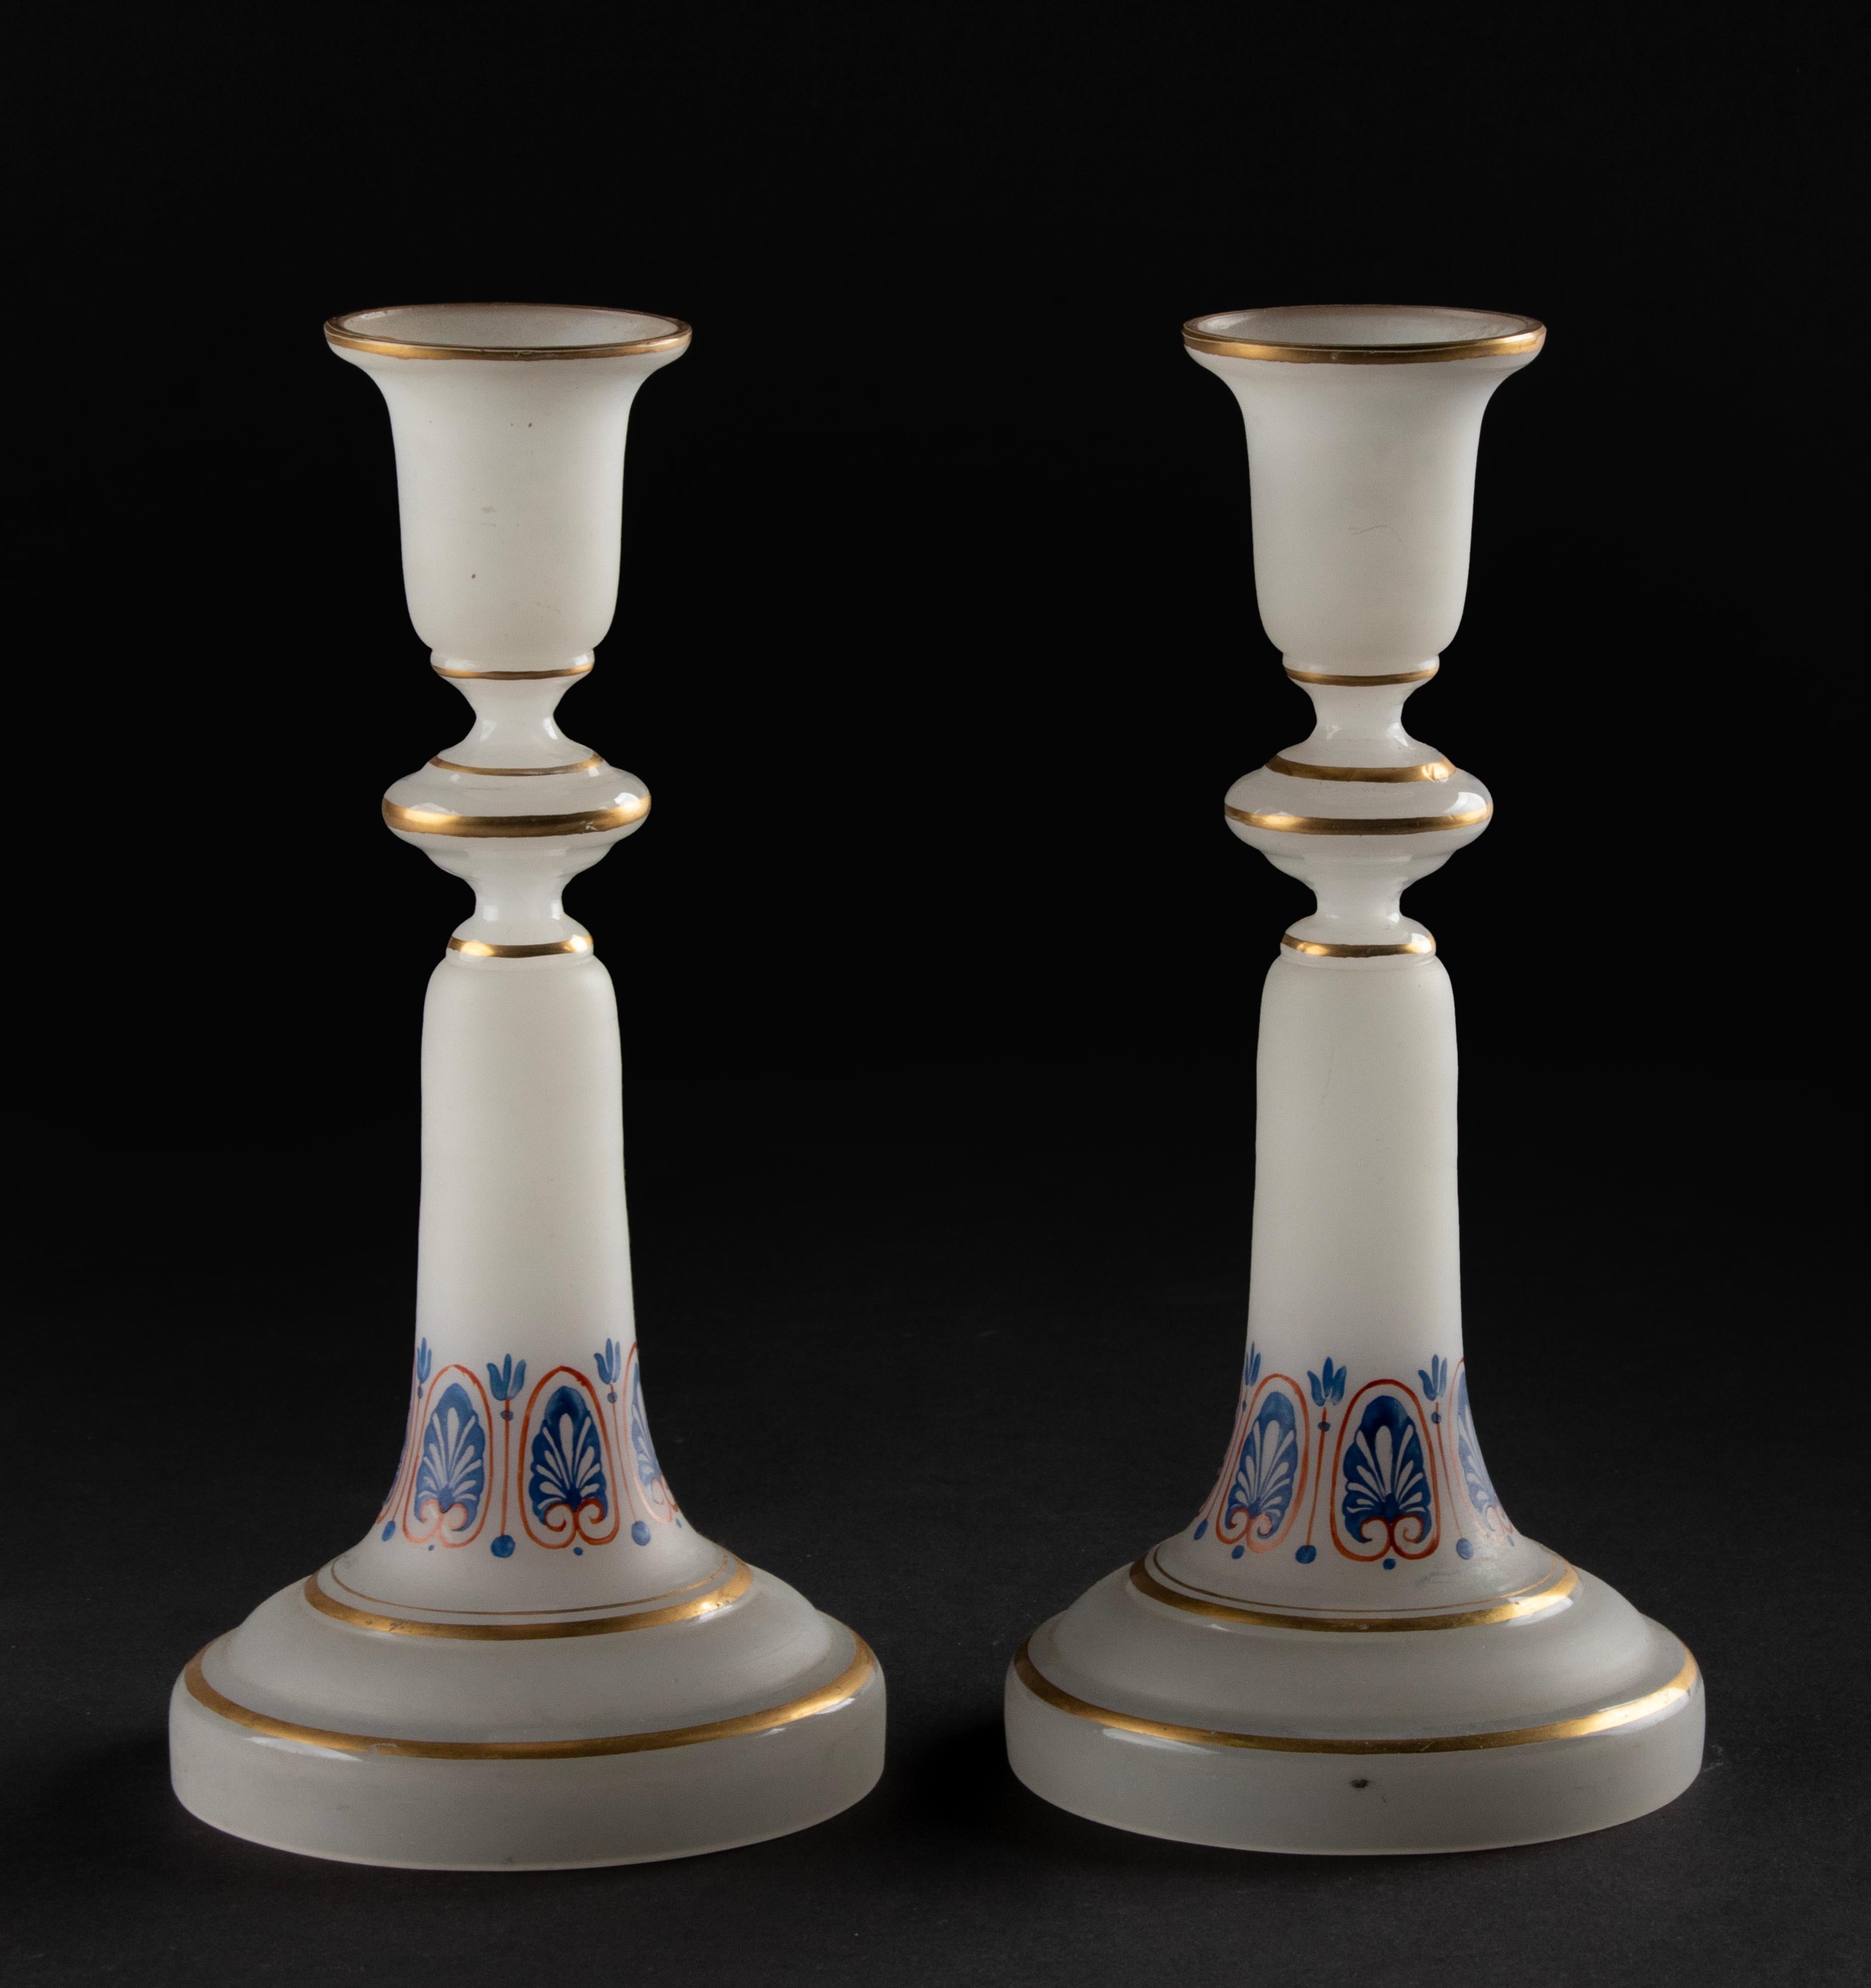 Gothic Revival 19th Century Opaline Glass Candlesticks For Sale